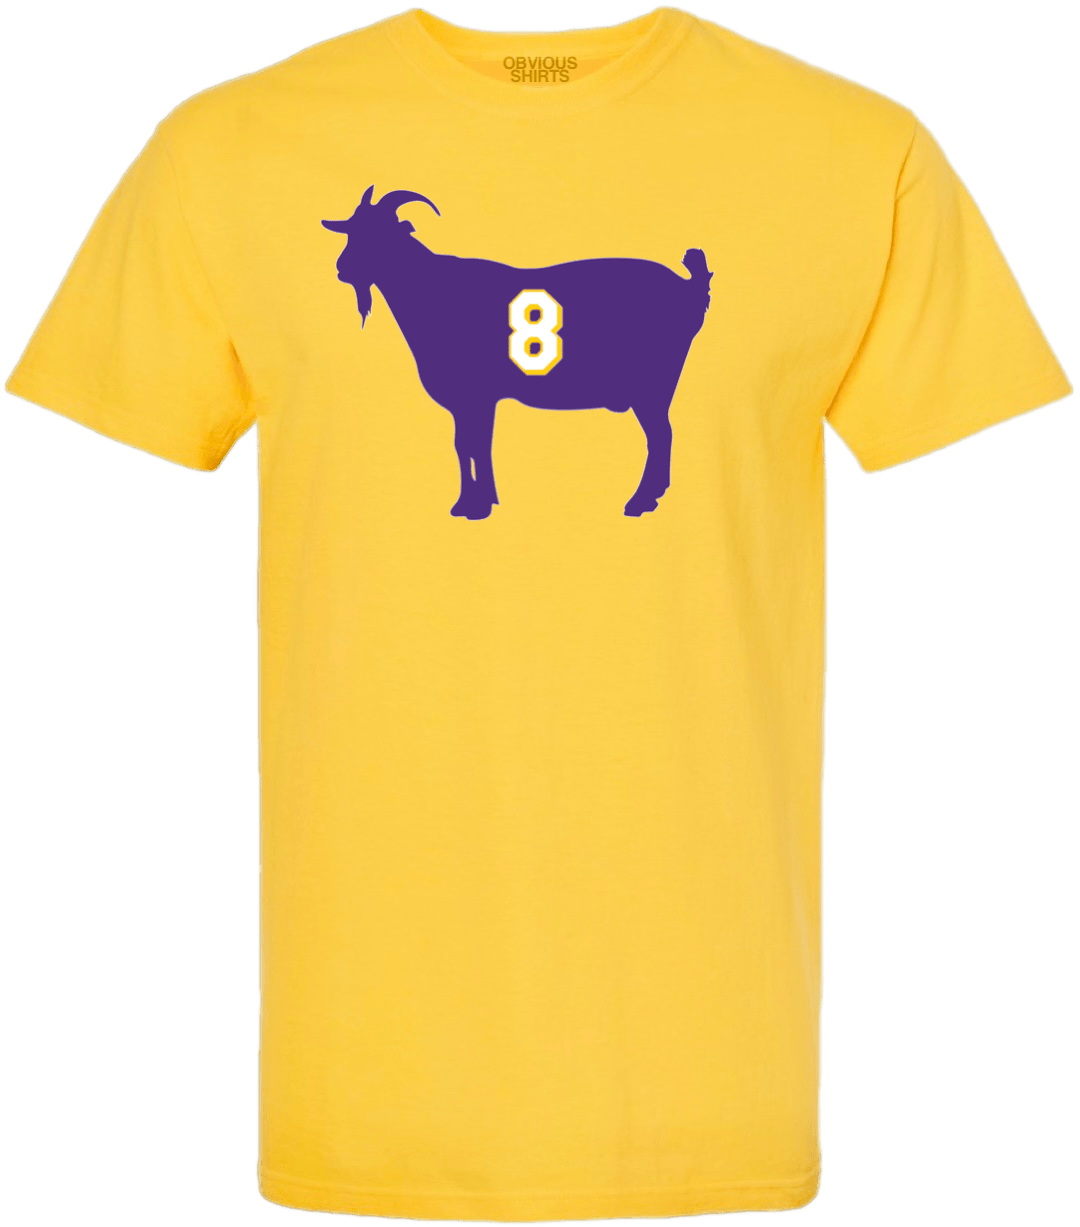 LOS ANGELES'S GOAT 8 - OBVIOUS SHIRTS